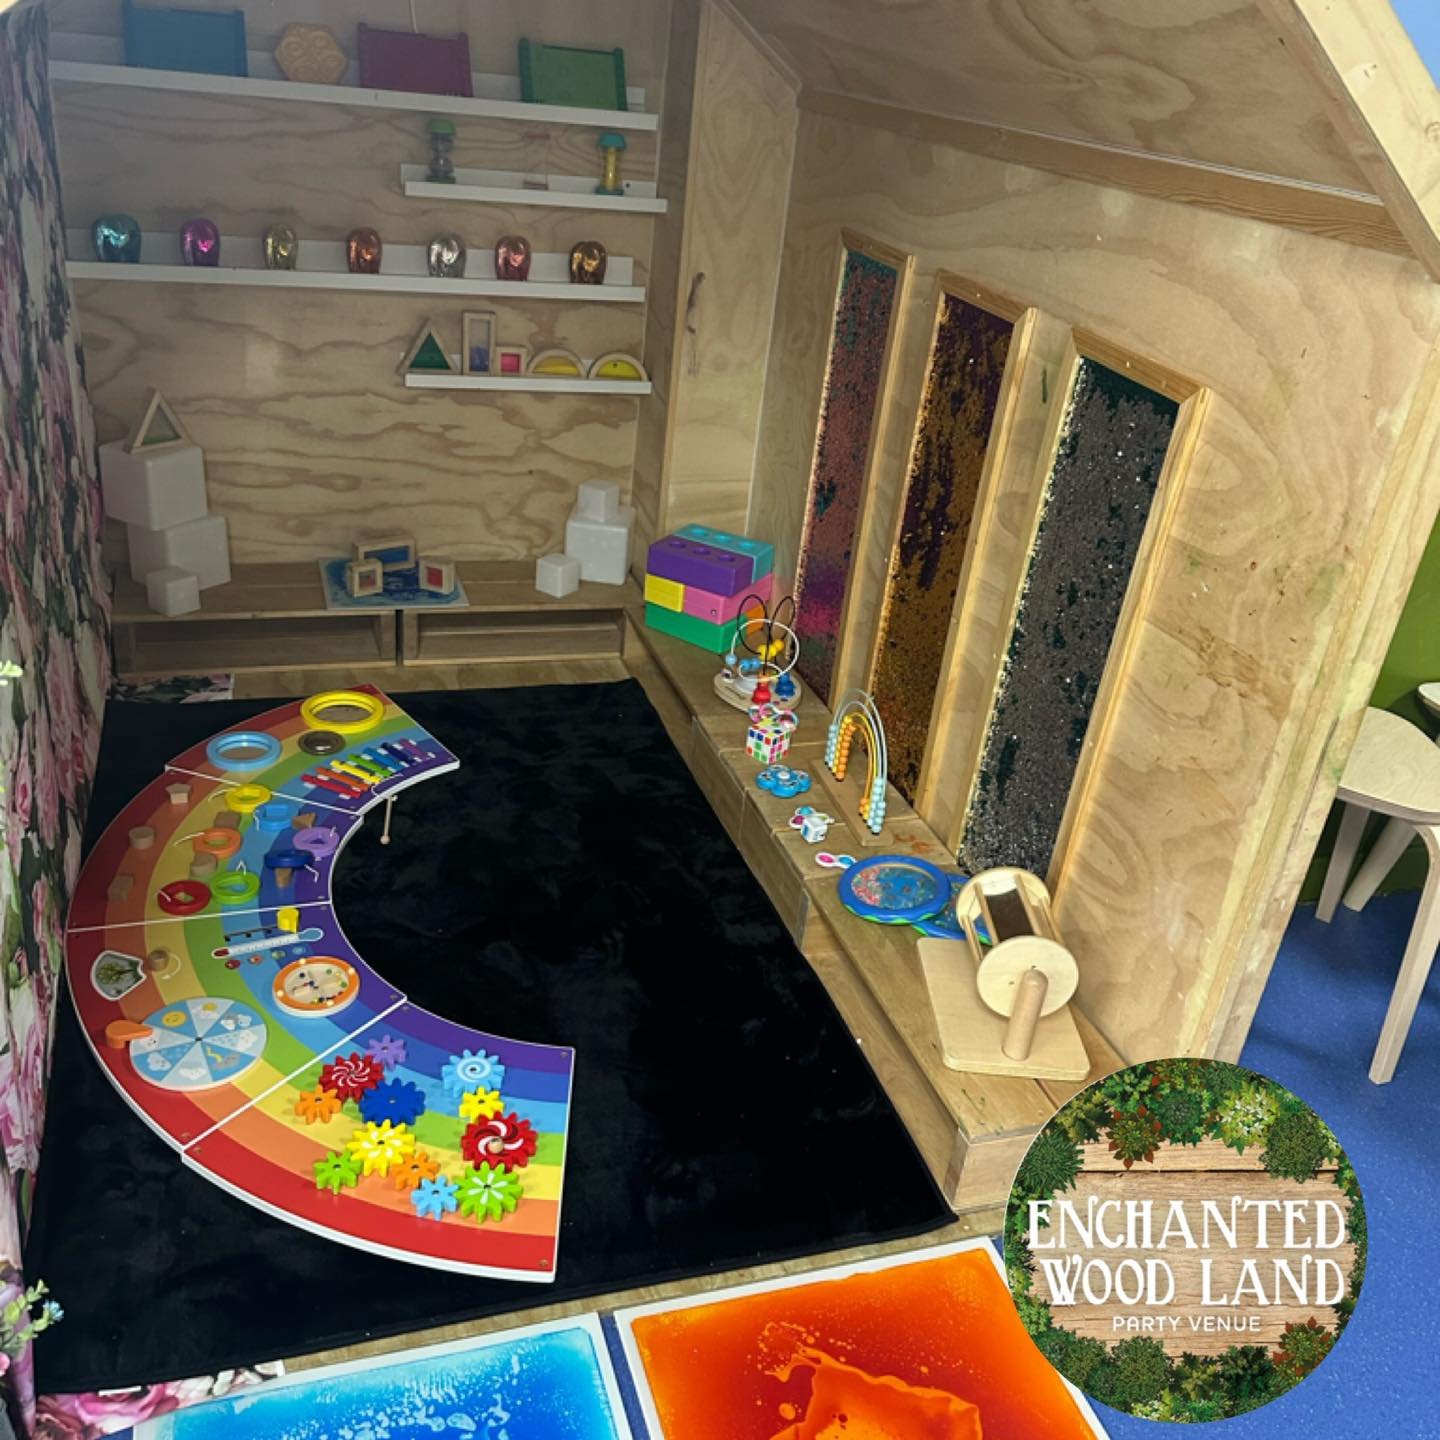 It&rsquo;s the WEEKEND!! 🎉🎉

We have some exciting new additions to our sensory den (it only arrived today, so not yet on the wall, but thought it too good not to share on the floor.)

Spaces to play tomorrow&hellip; 

Friday 26th April
9am- Brilli